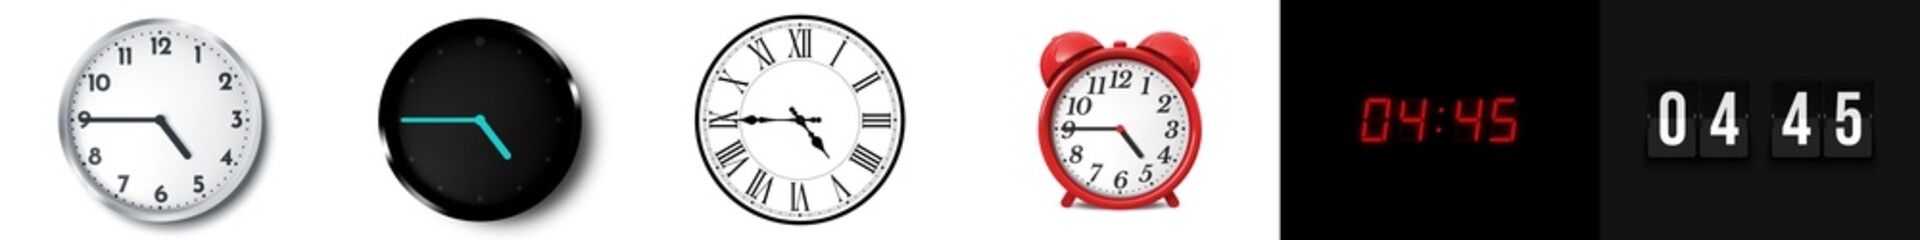 04:45 (AM and PM) or 16:45 time clock icons